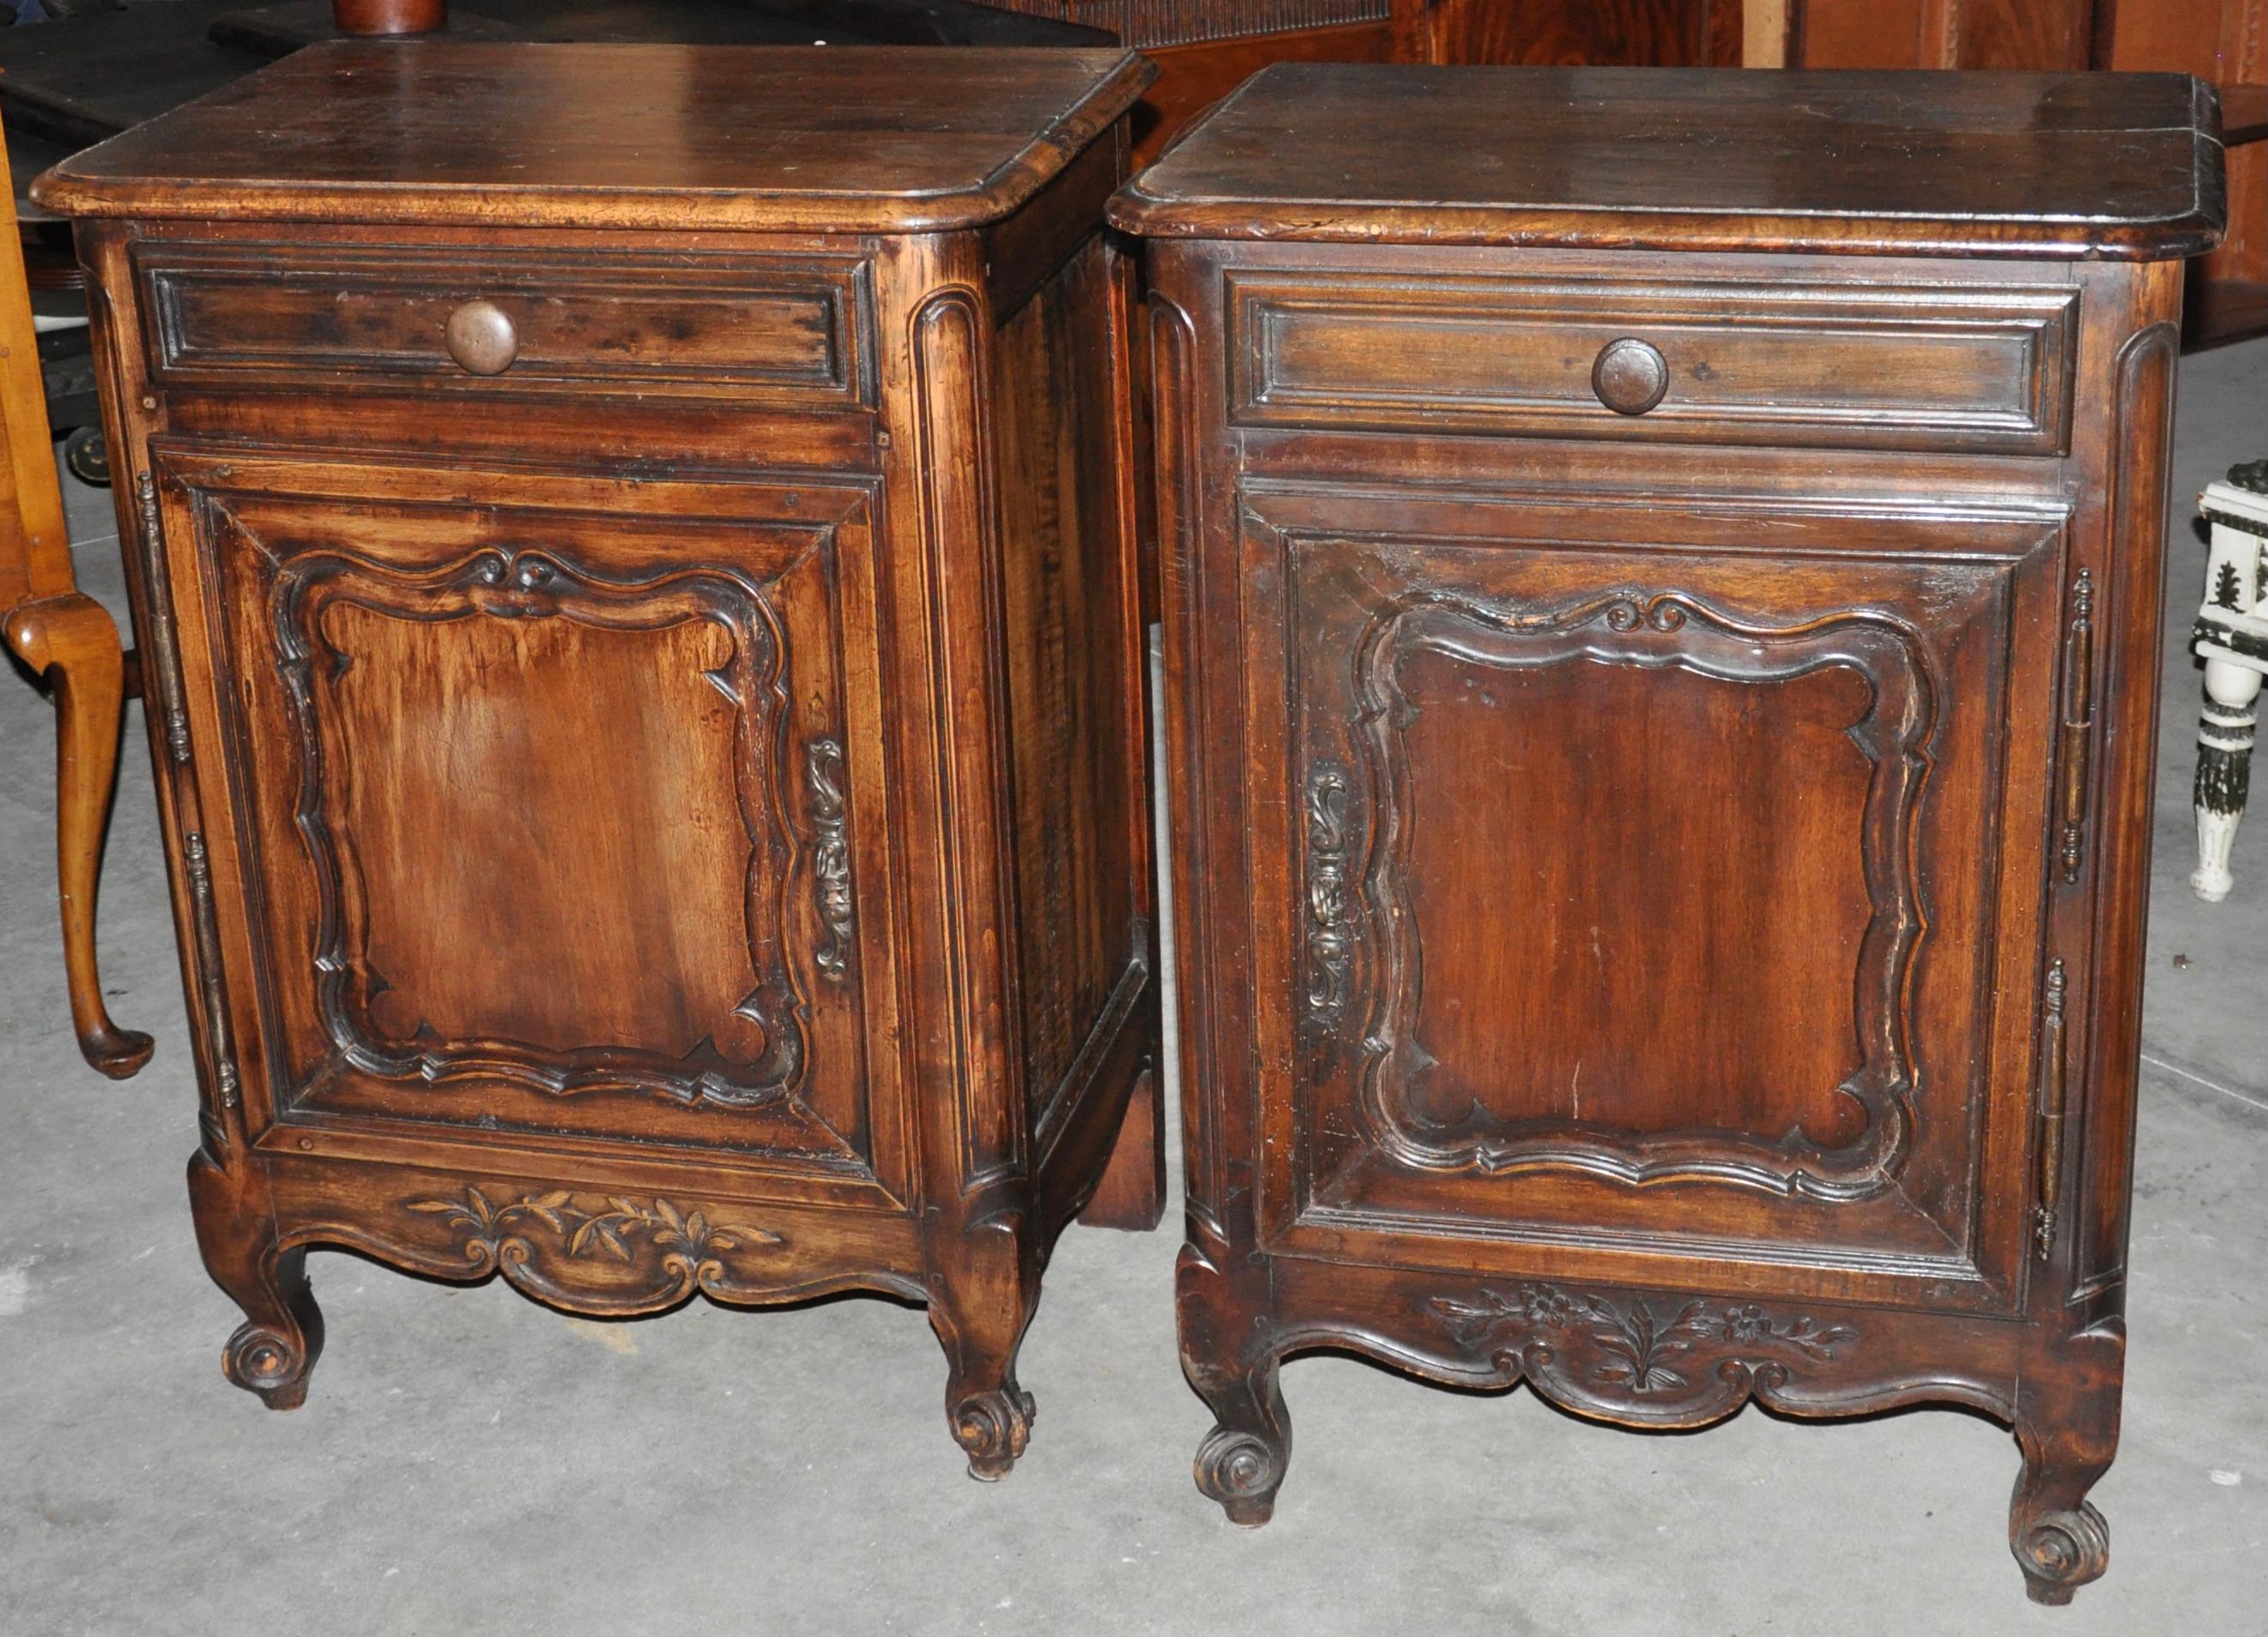 Pair of Louis XV style French Provincial side cabinets. Each with bottom door and one drawer. Walnut and fruitwood. Molded carved framed panel. Original finish. Cabriole legs. Great patina.